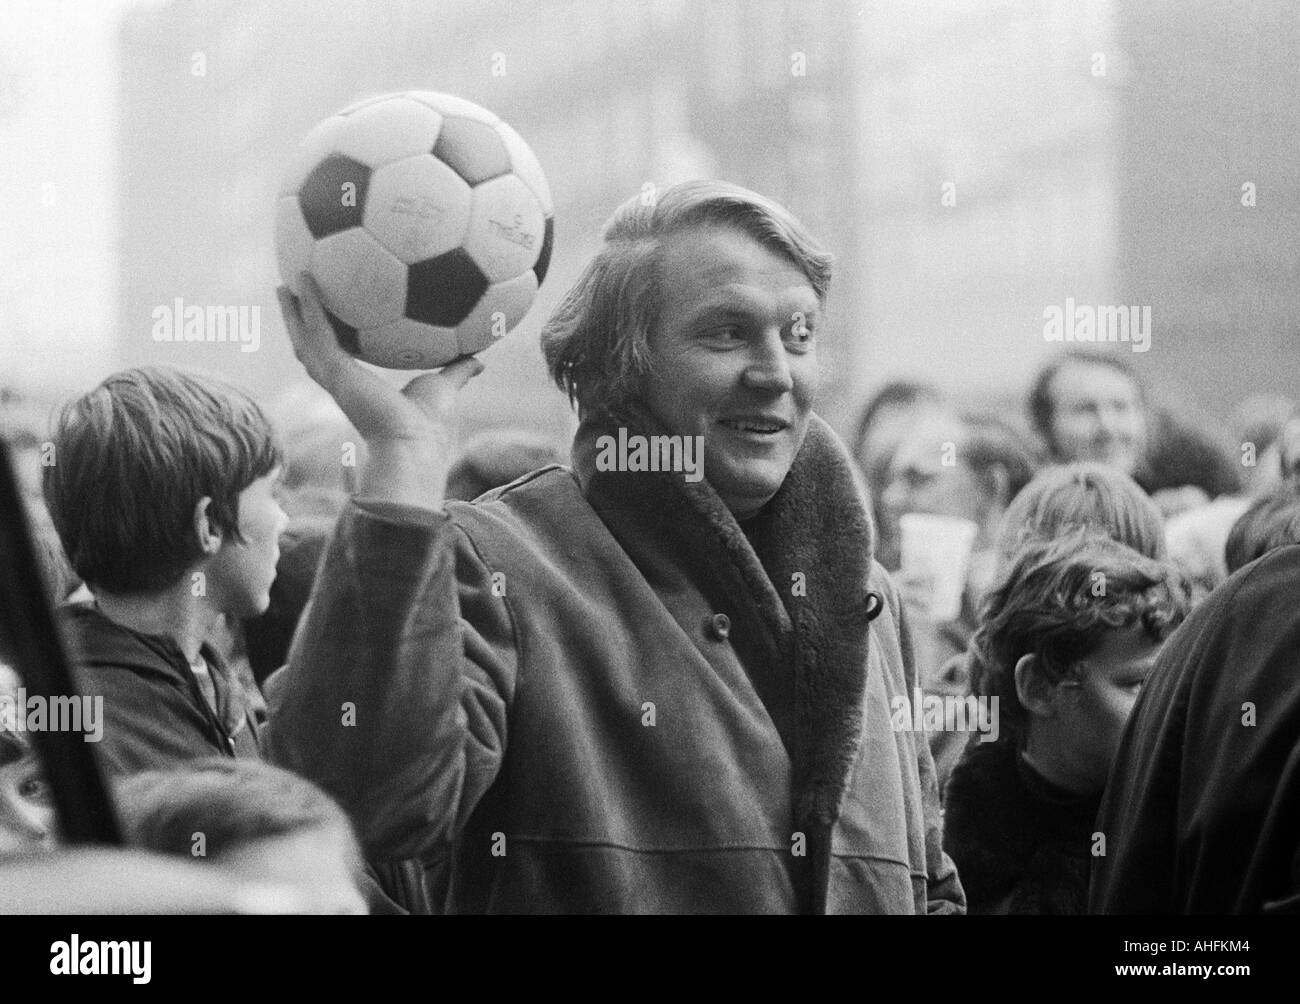 football, Bundesliga, american auction of a leather ball in favour of handicapped children, Lothar Kobluhn, player of Rot-Weiss Oberhausen, Bundesliga top scorer in the season 1970/1971 with 24 scored goals Stock Photo